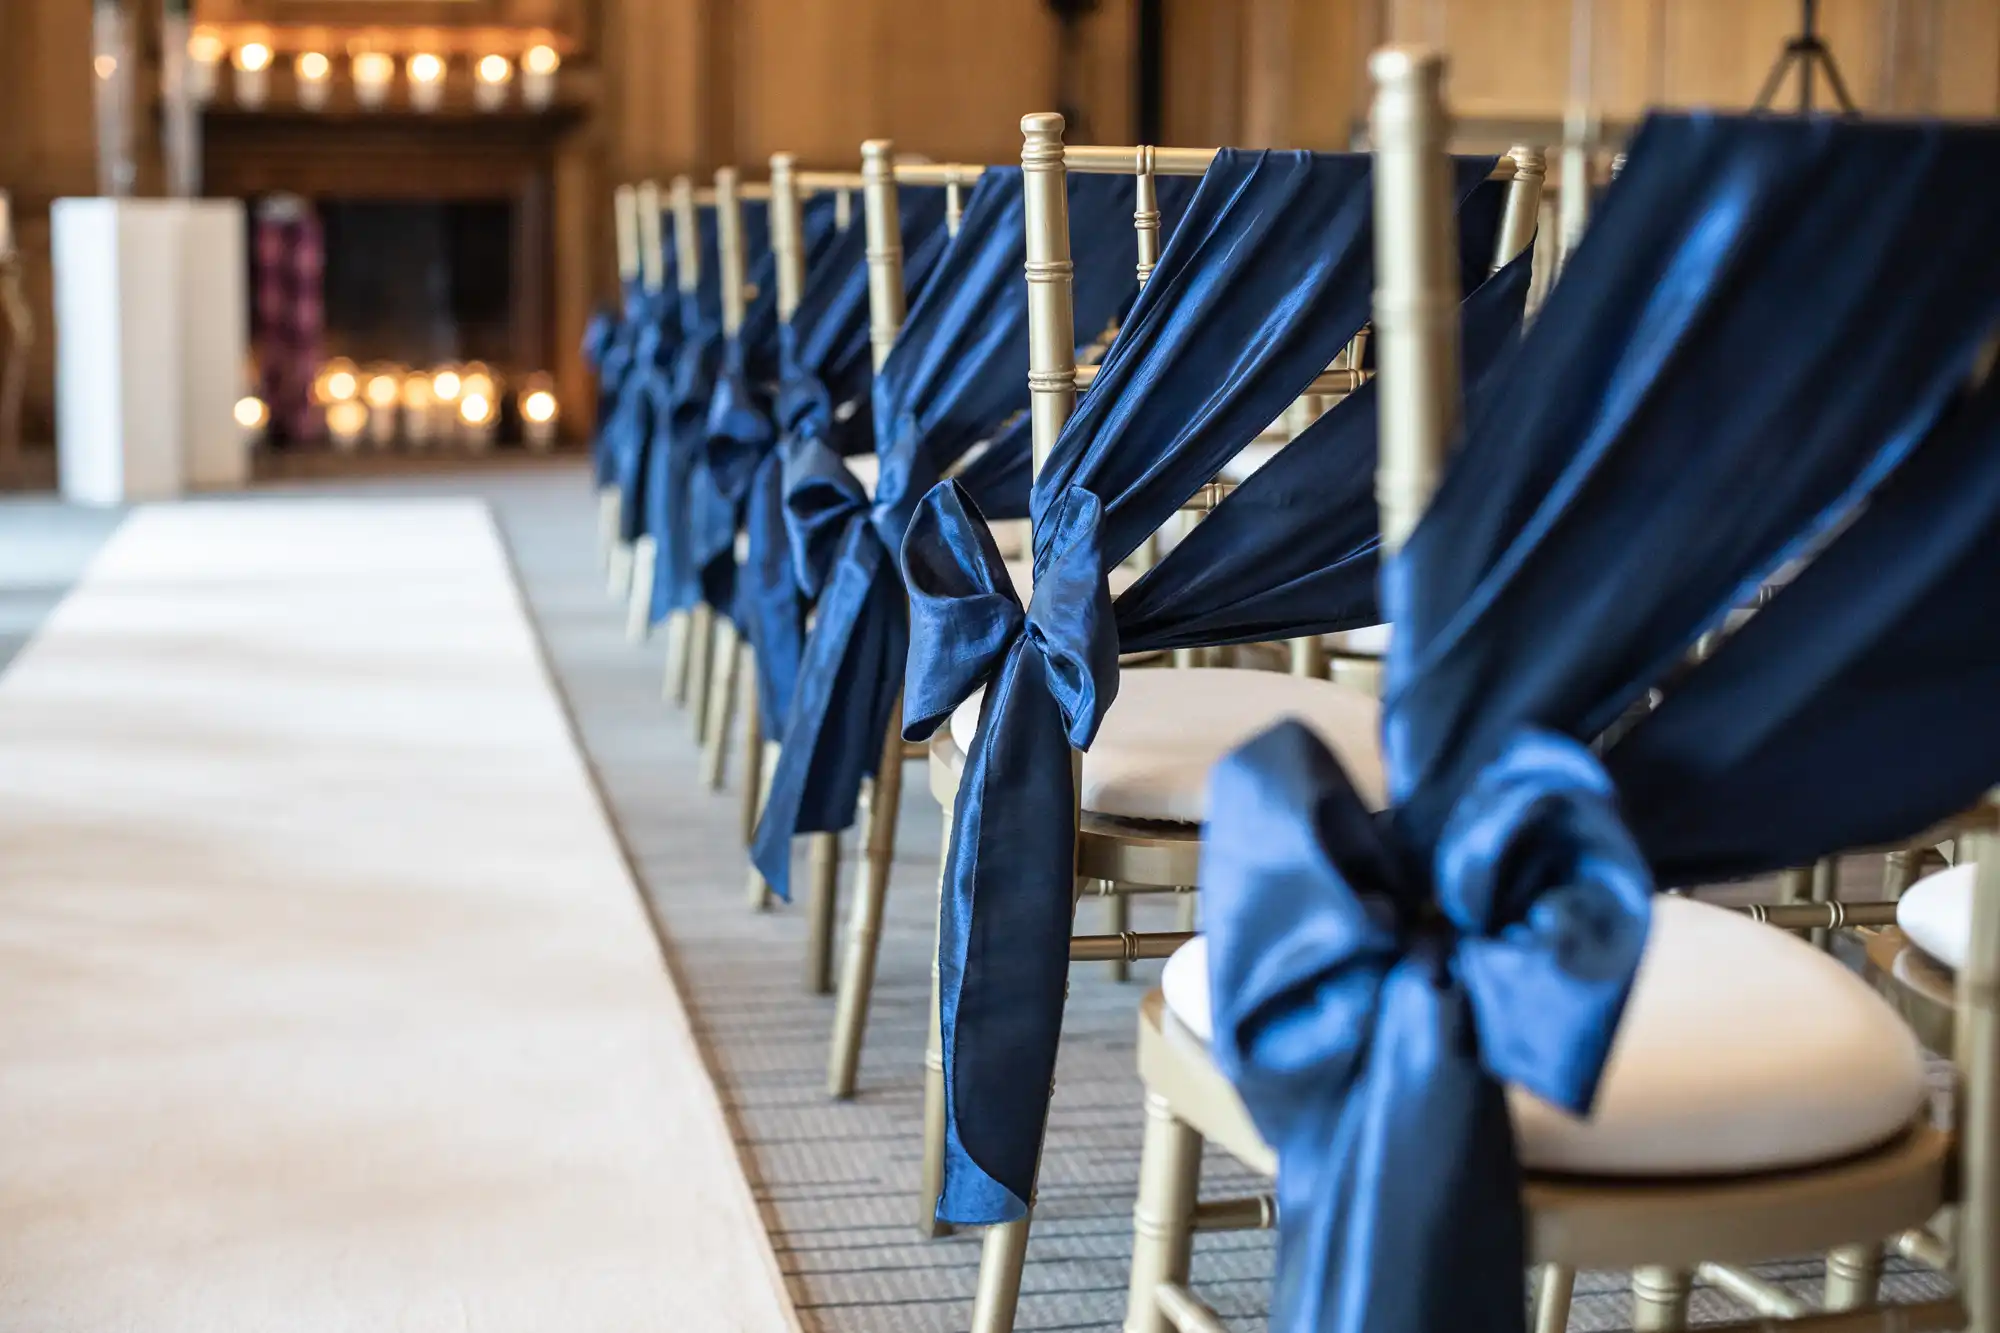 Rows of chairs with blue bows are aligned next to a white aisle, set up for an indoor event. Candles are lit on a mantel in the background.